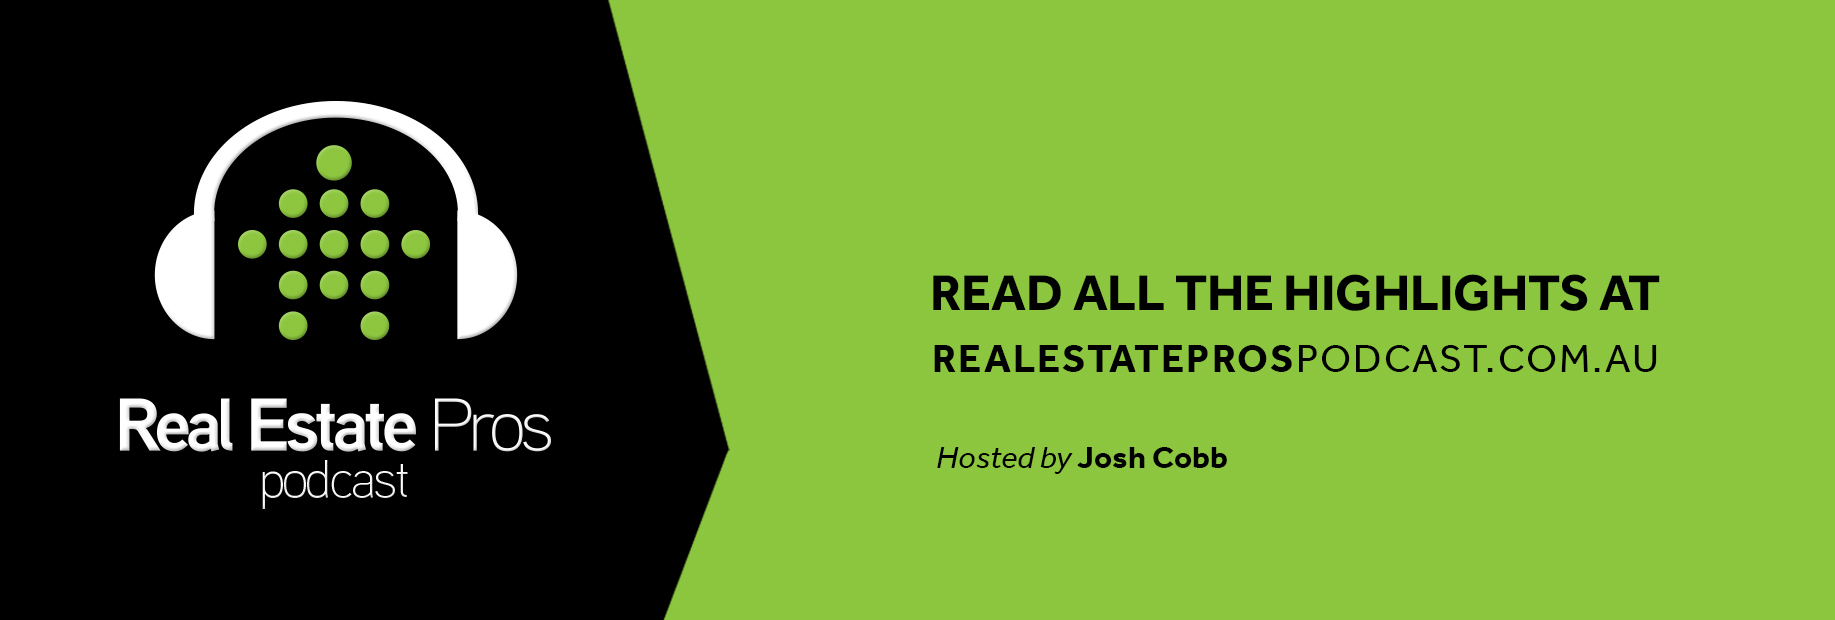 Real Estate Pros Podcast: For Real People Working in Real Estate header image 1